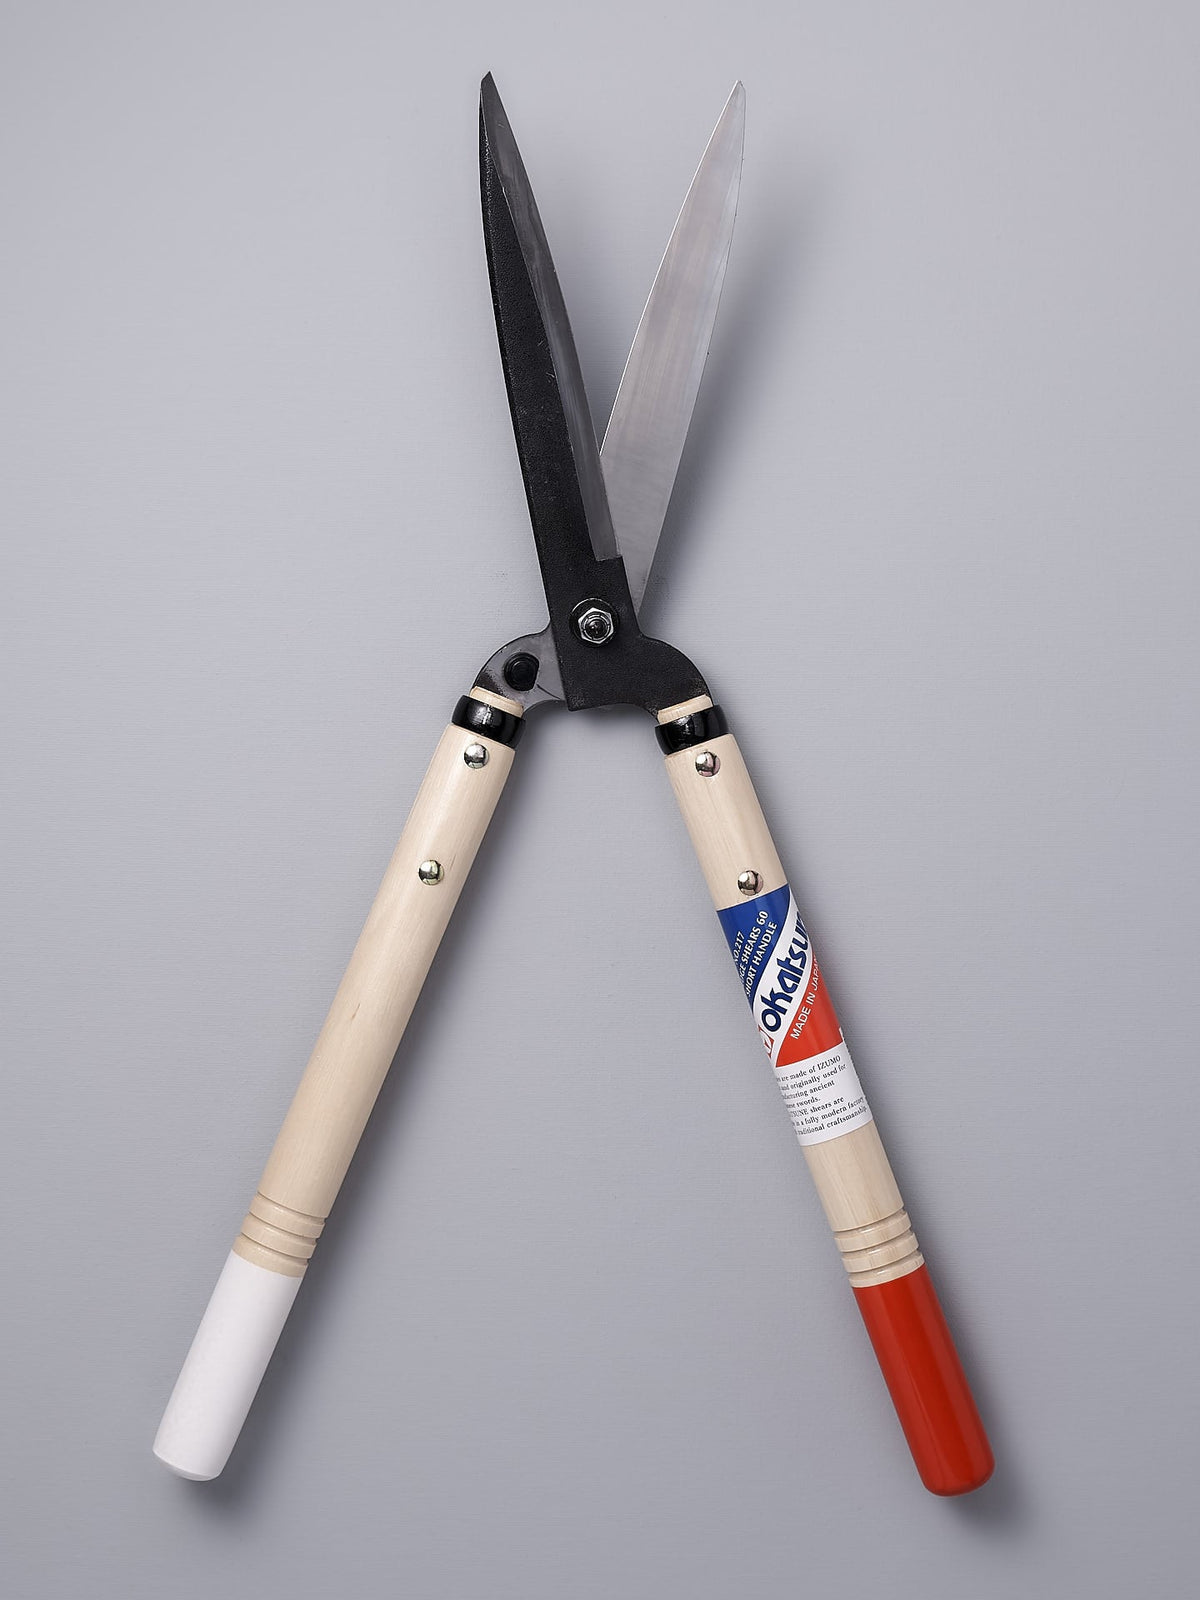 A pair of Okatsune Japanese Hedge Shears №217 – Short Handled with a red, white and blue handle.